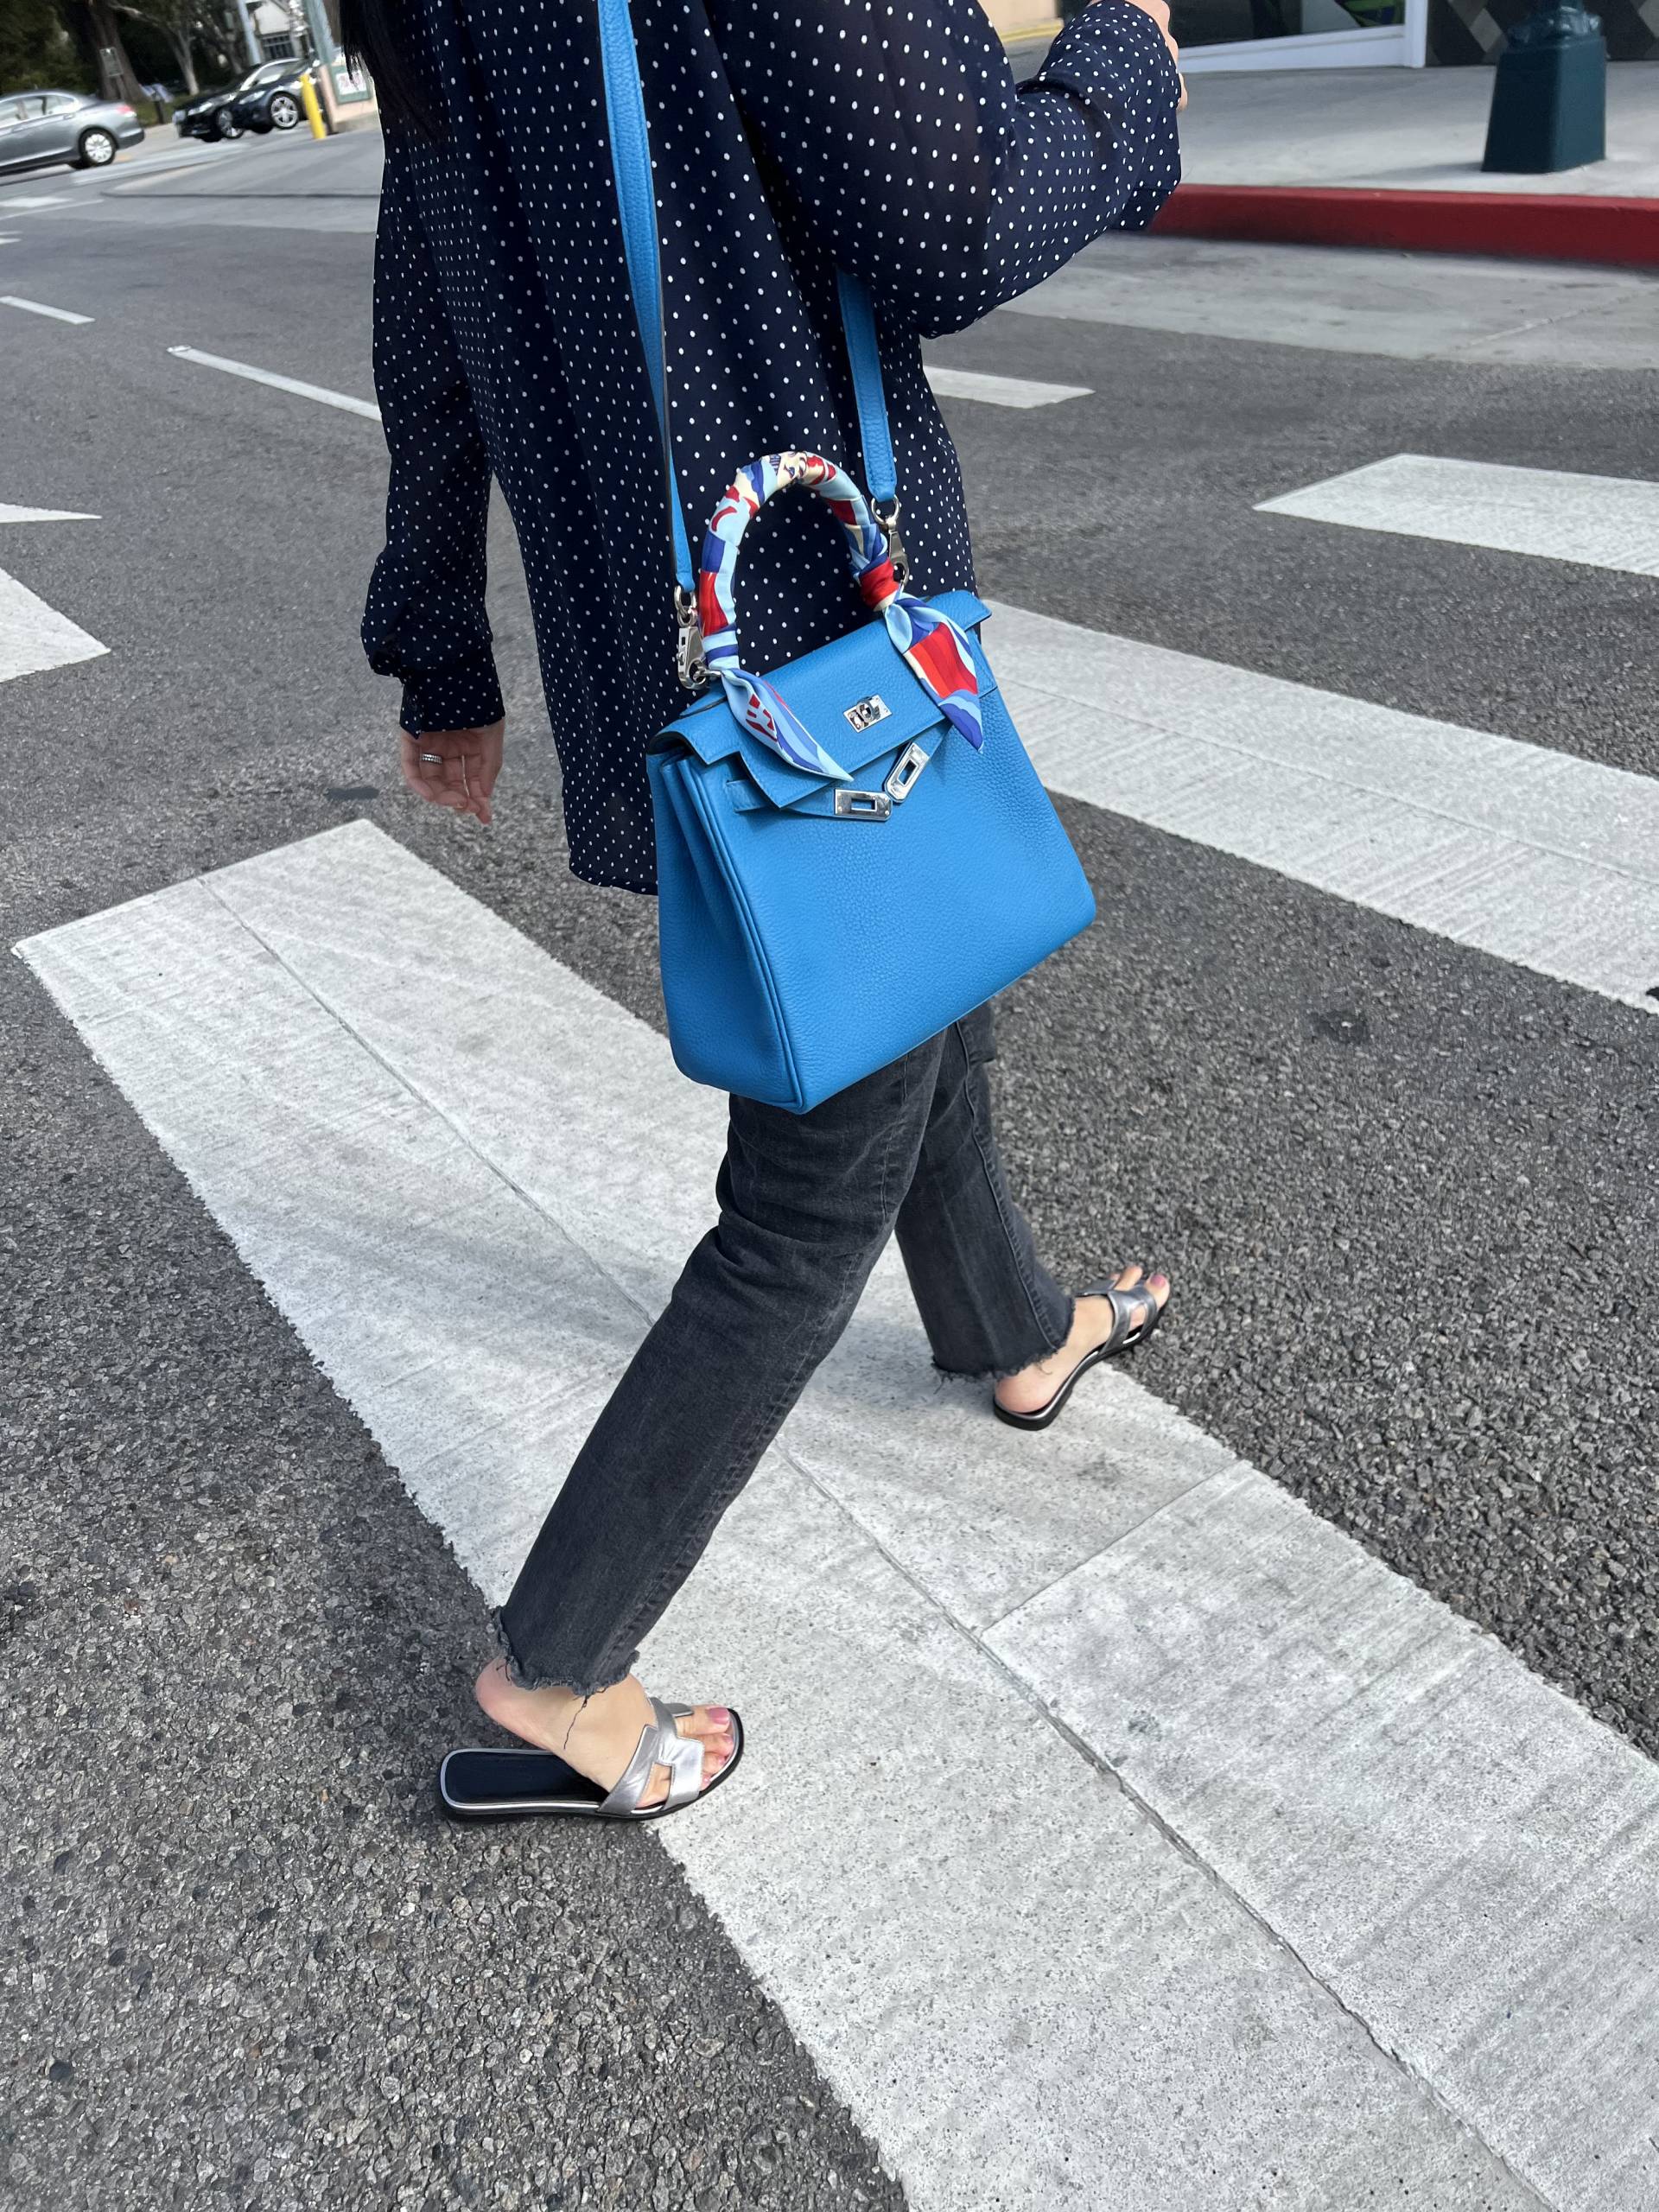 Hermès Kellys We Spotted in Action on Rodeo Drive in 2023